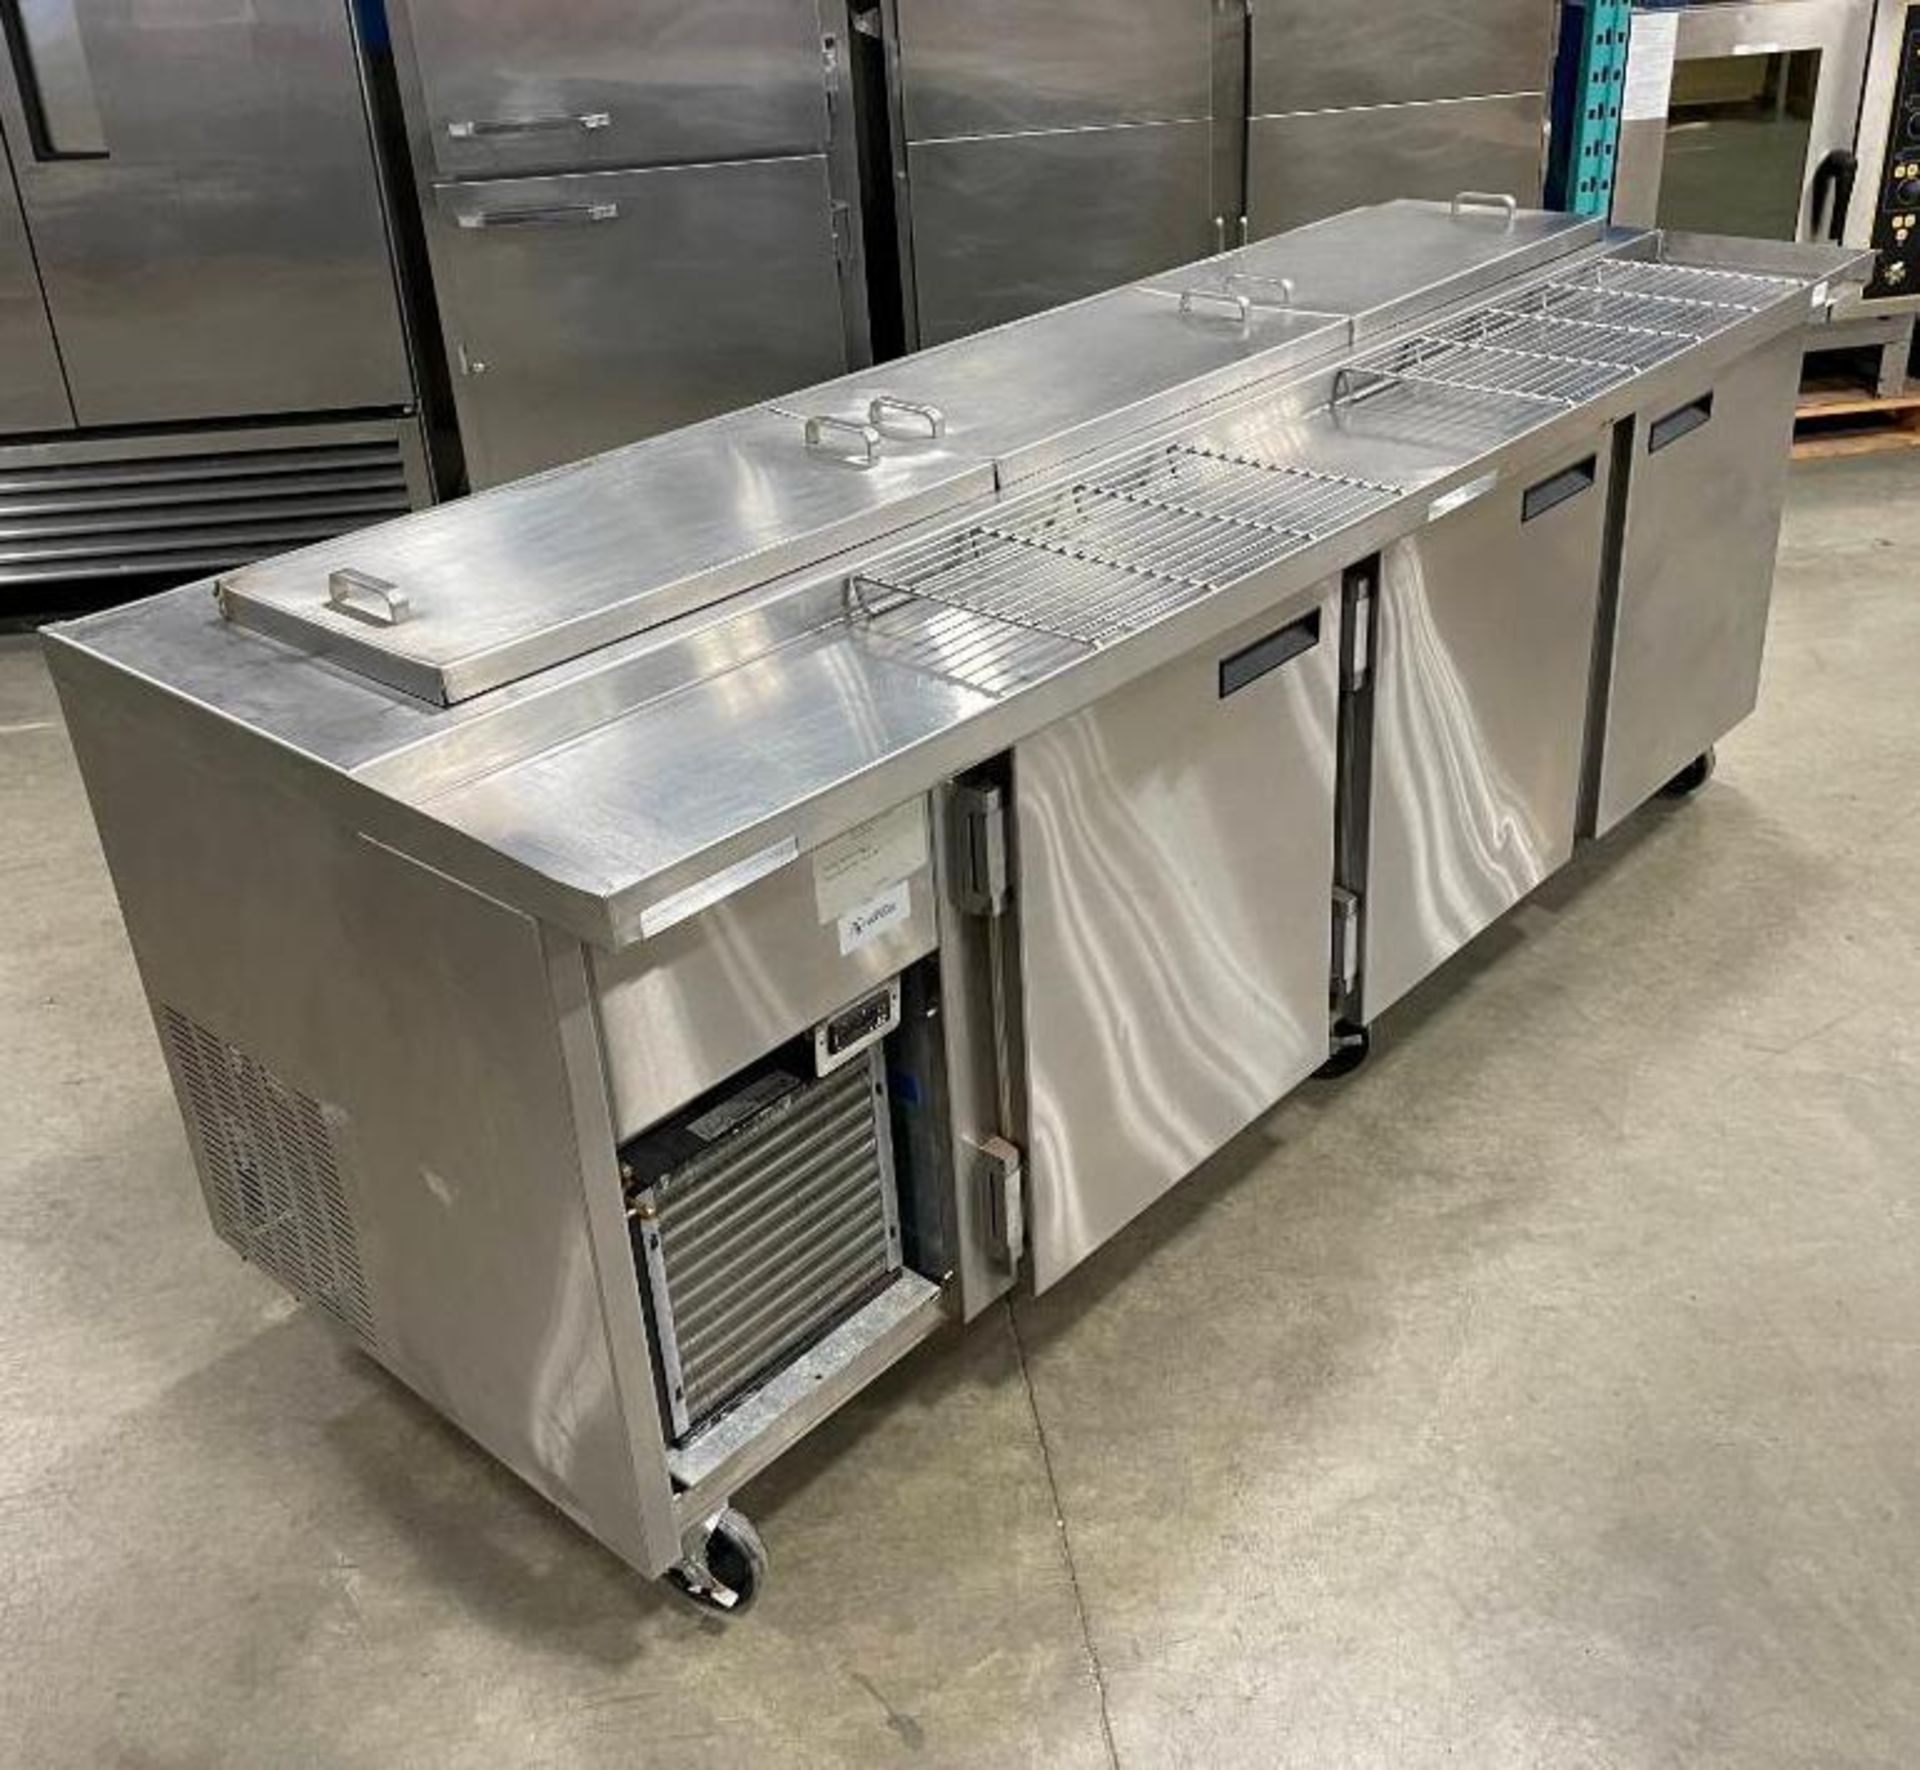 WASSERSTROM D562-01-18D 95" PIZZA PREP TABLE - Image 2 of 14